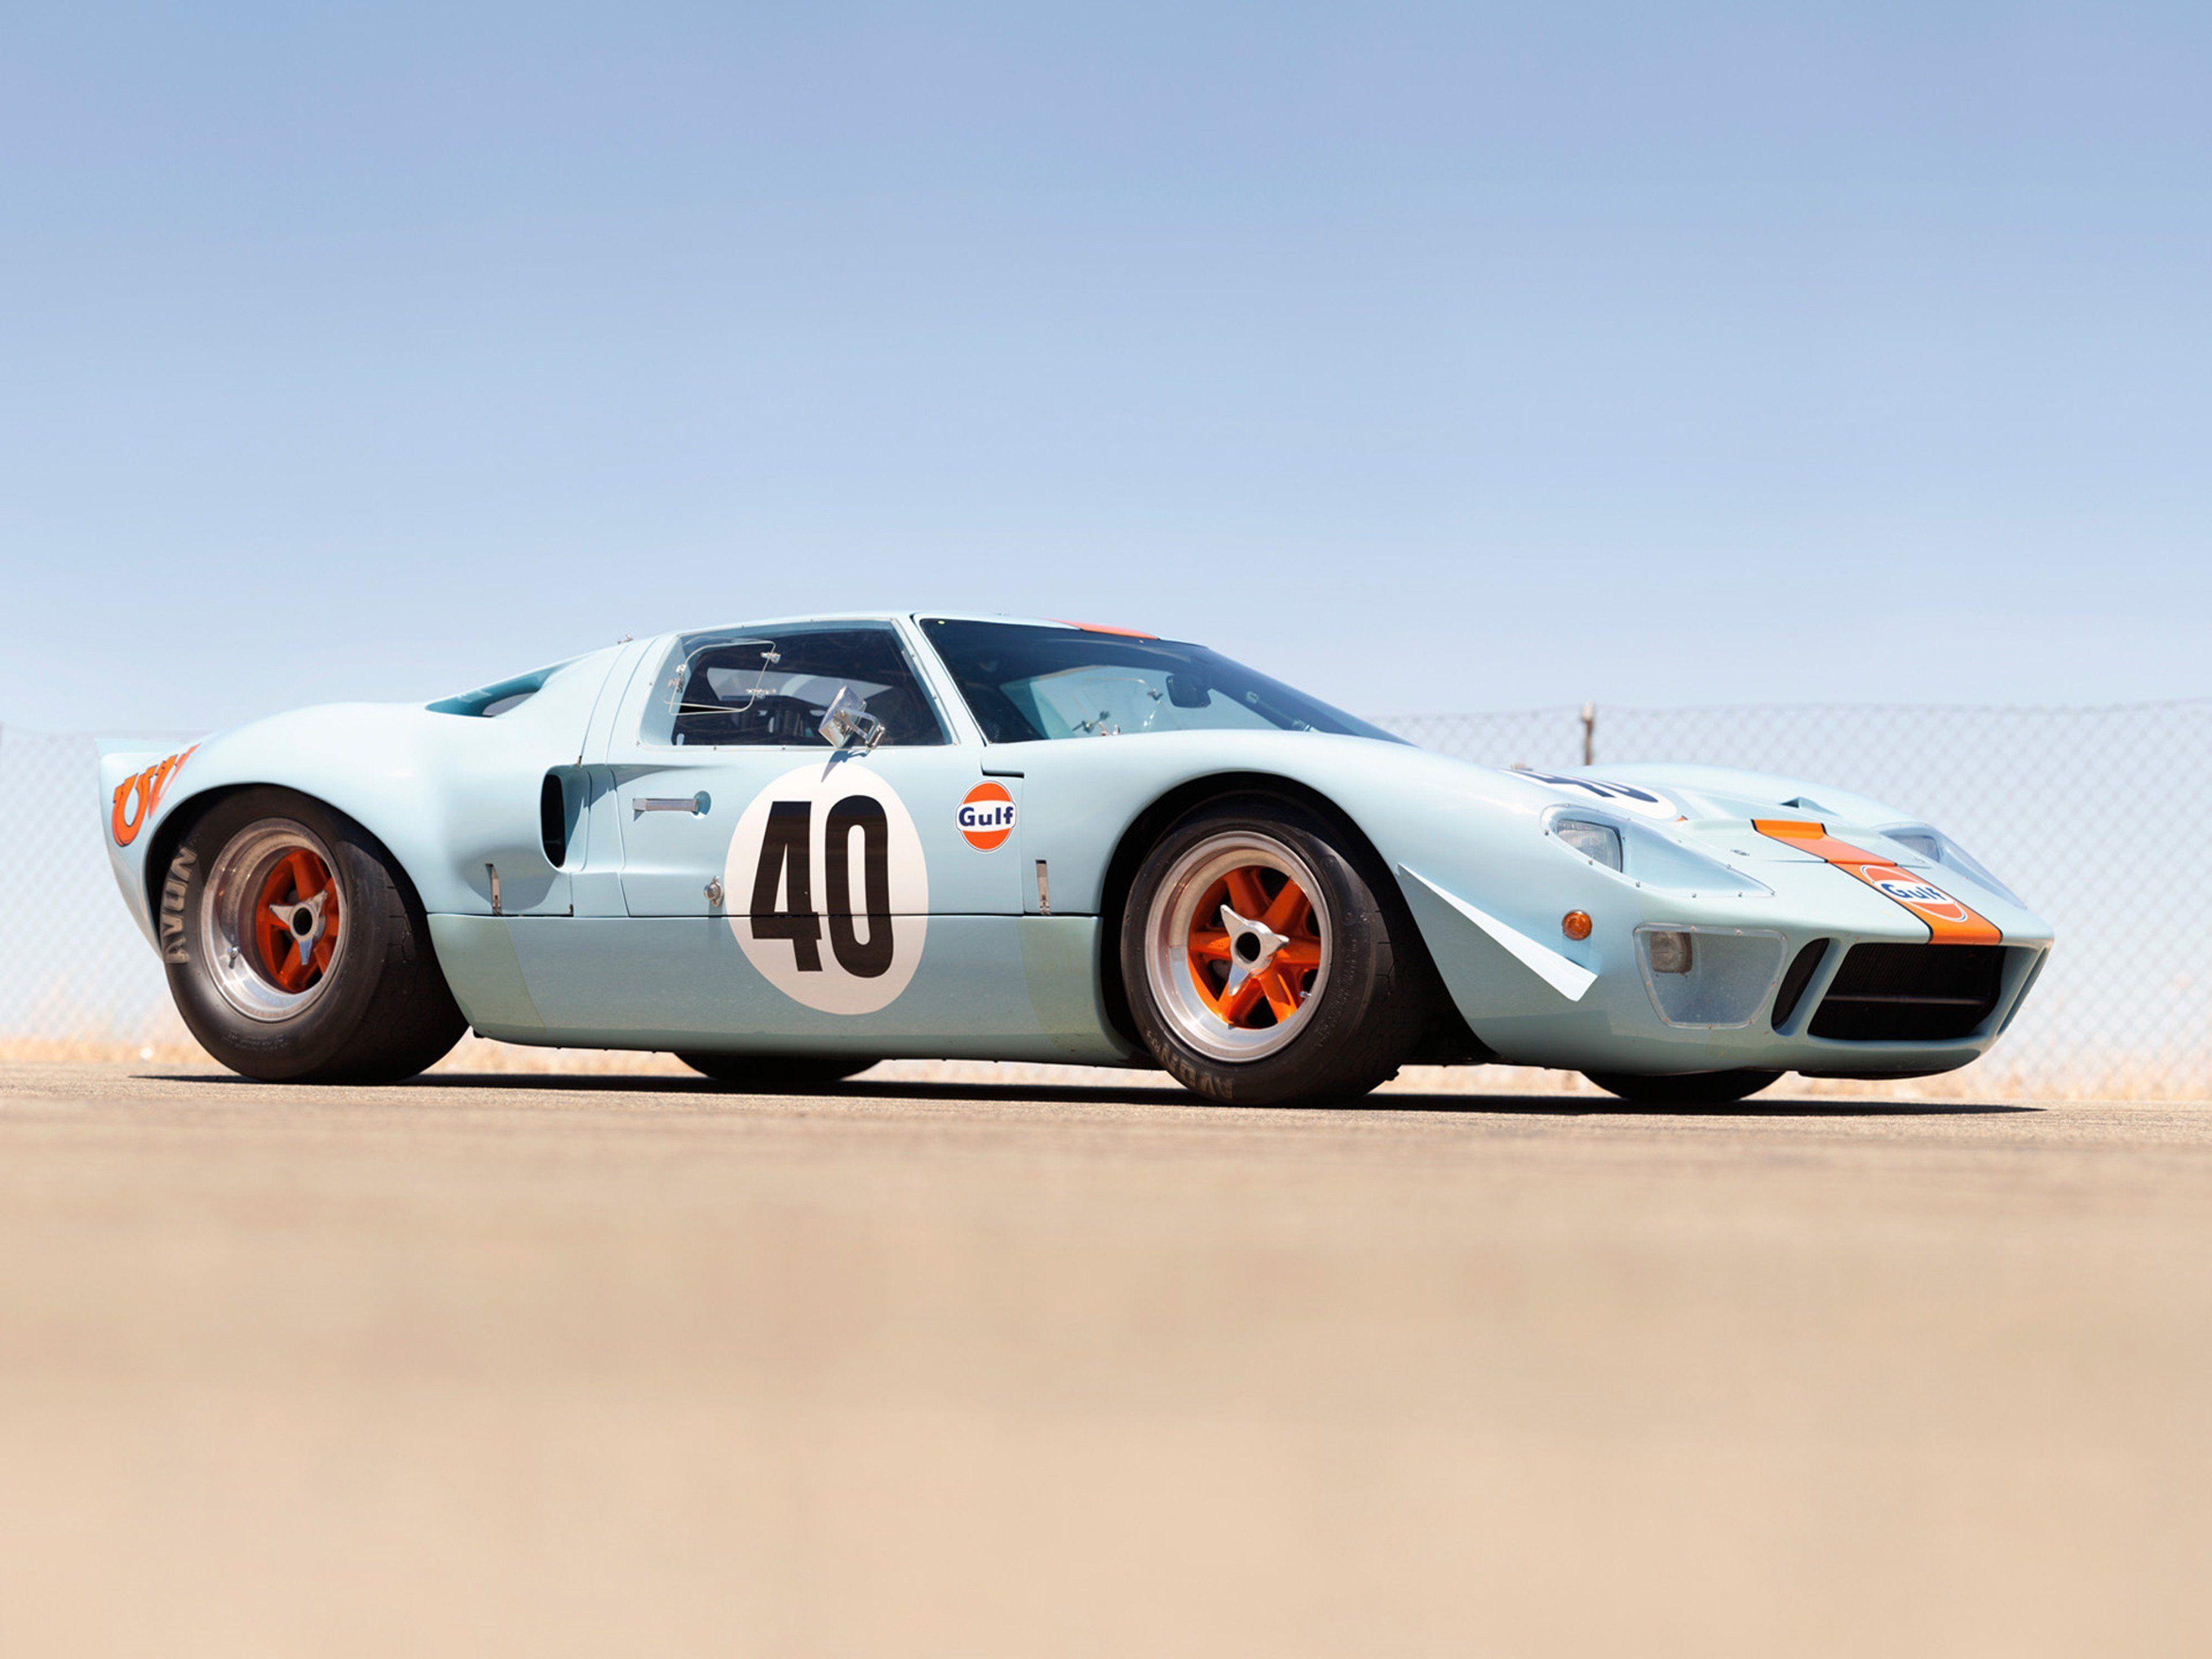 Gulf Ford GT40 Le Mans Racing Car Race Classic 4000x3000